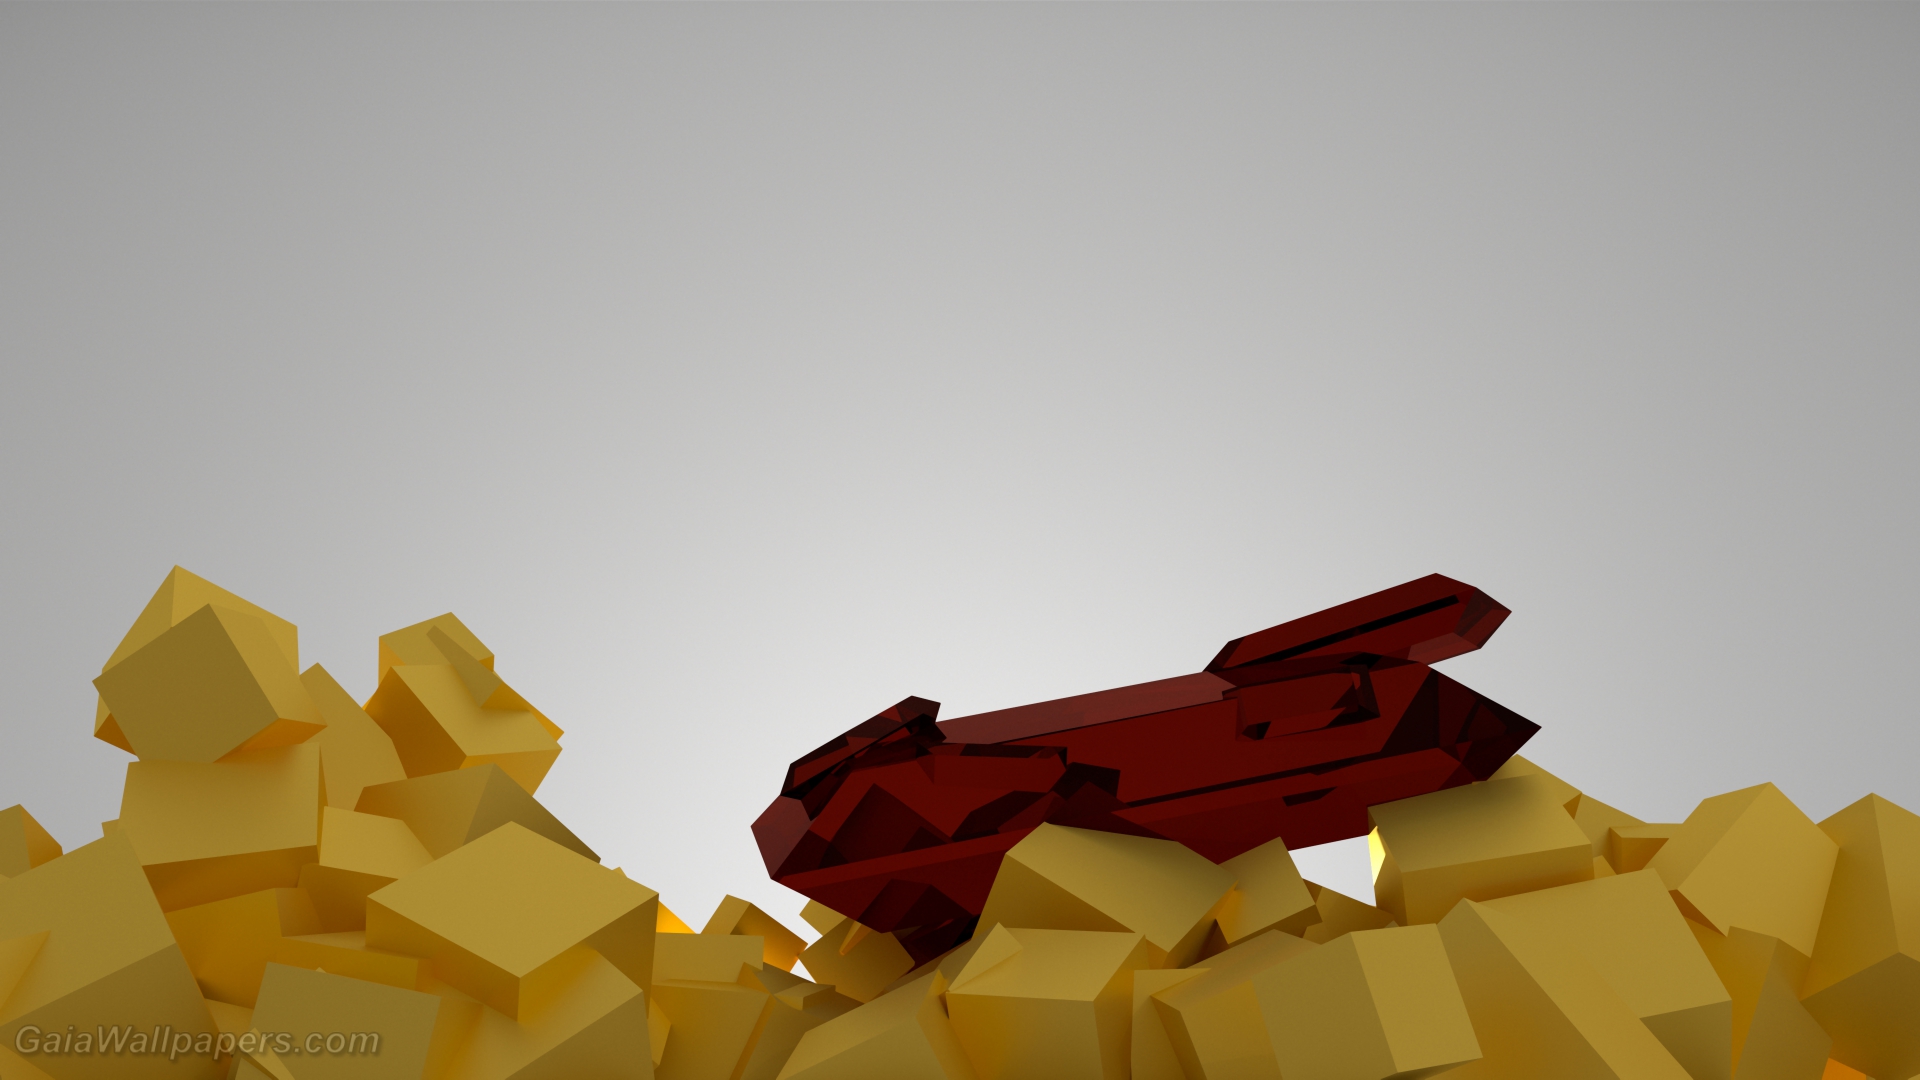 Red gemstone with pyrite cubes - Free desktop wallpapers